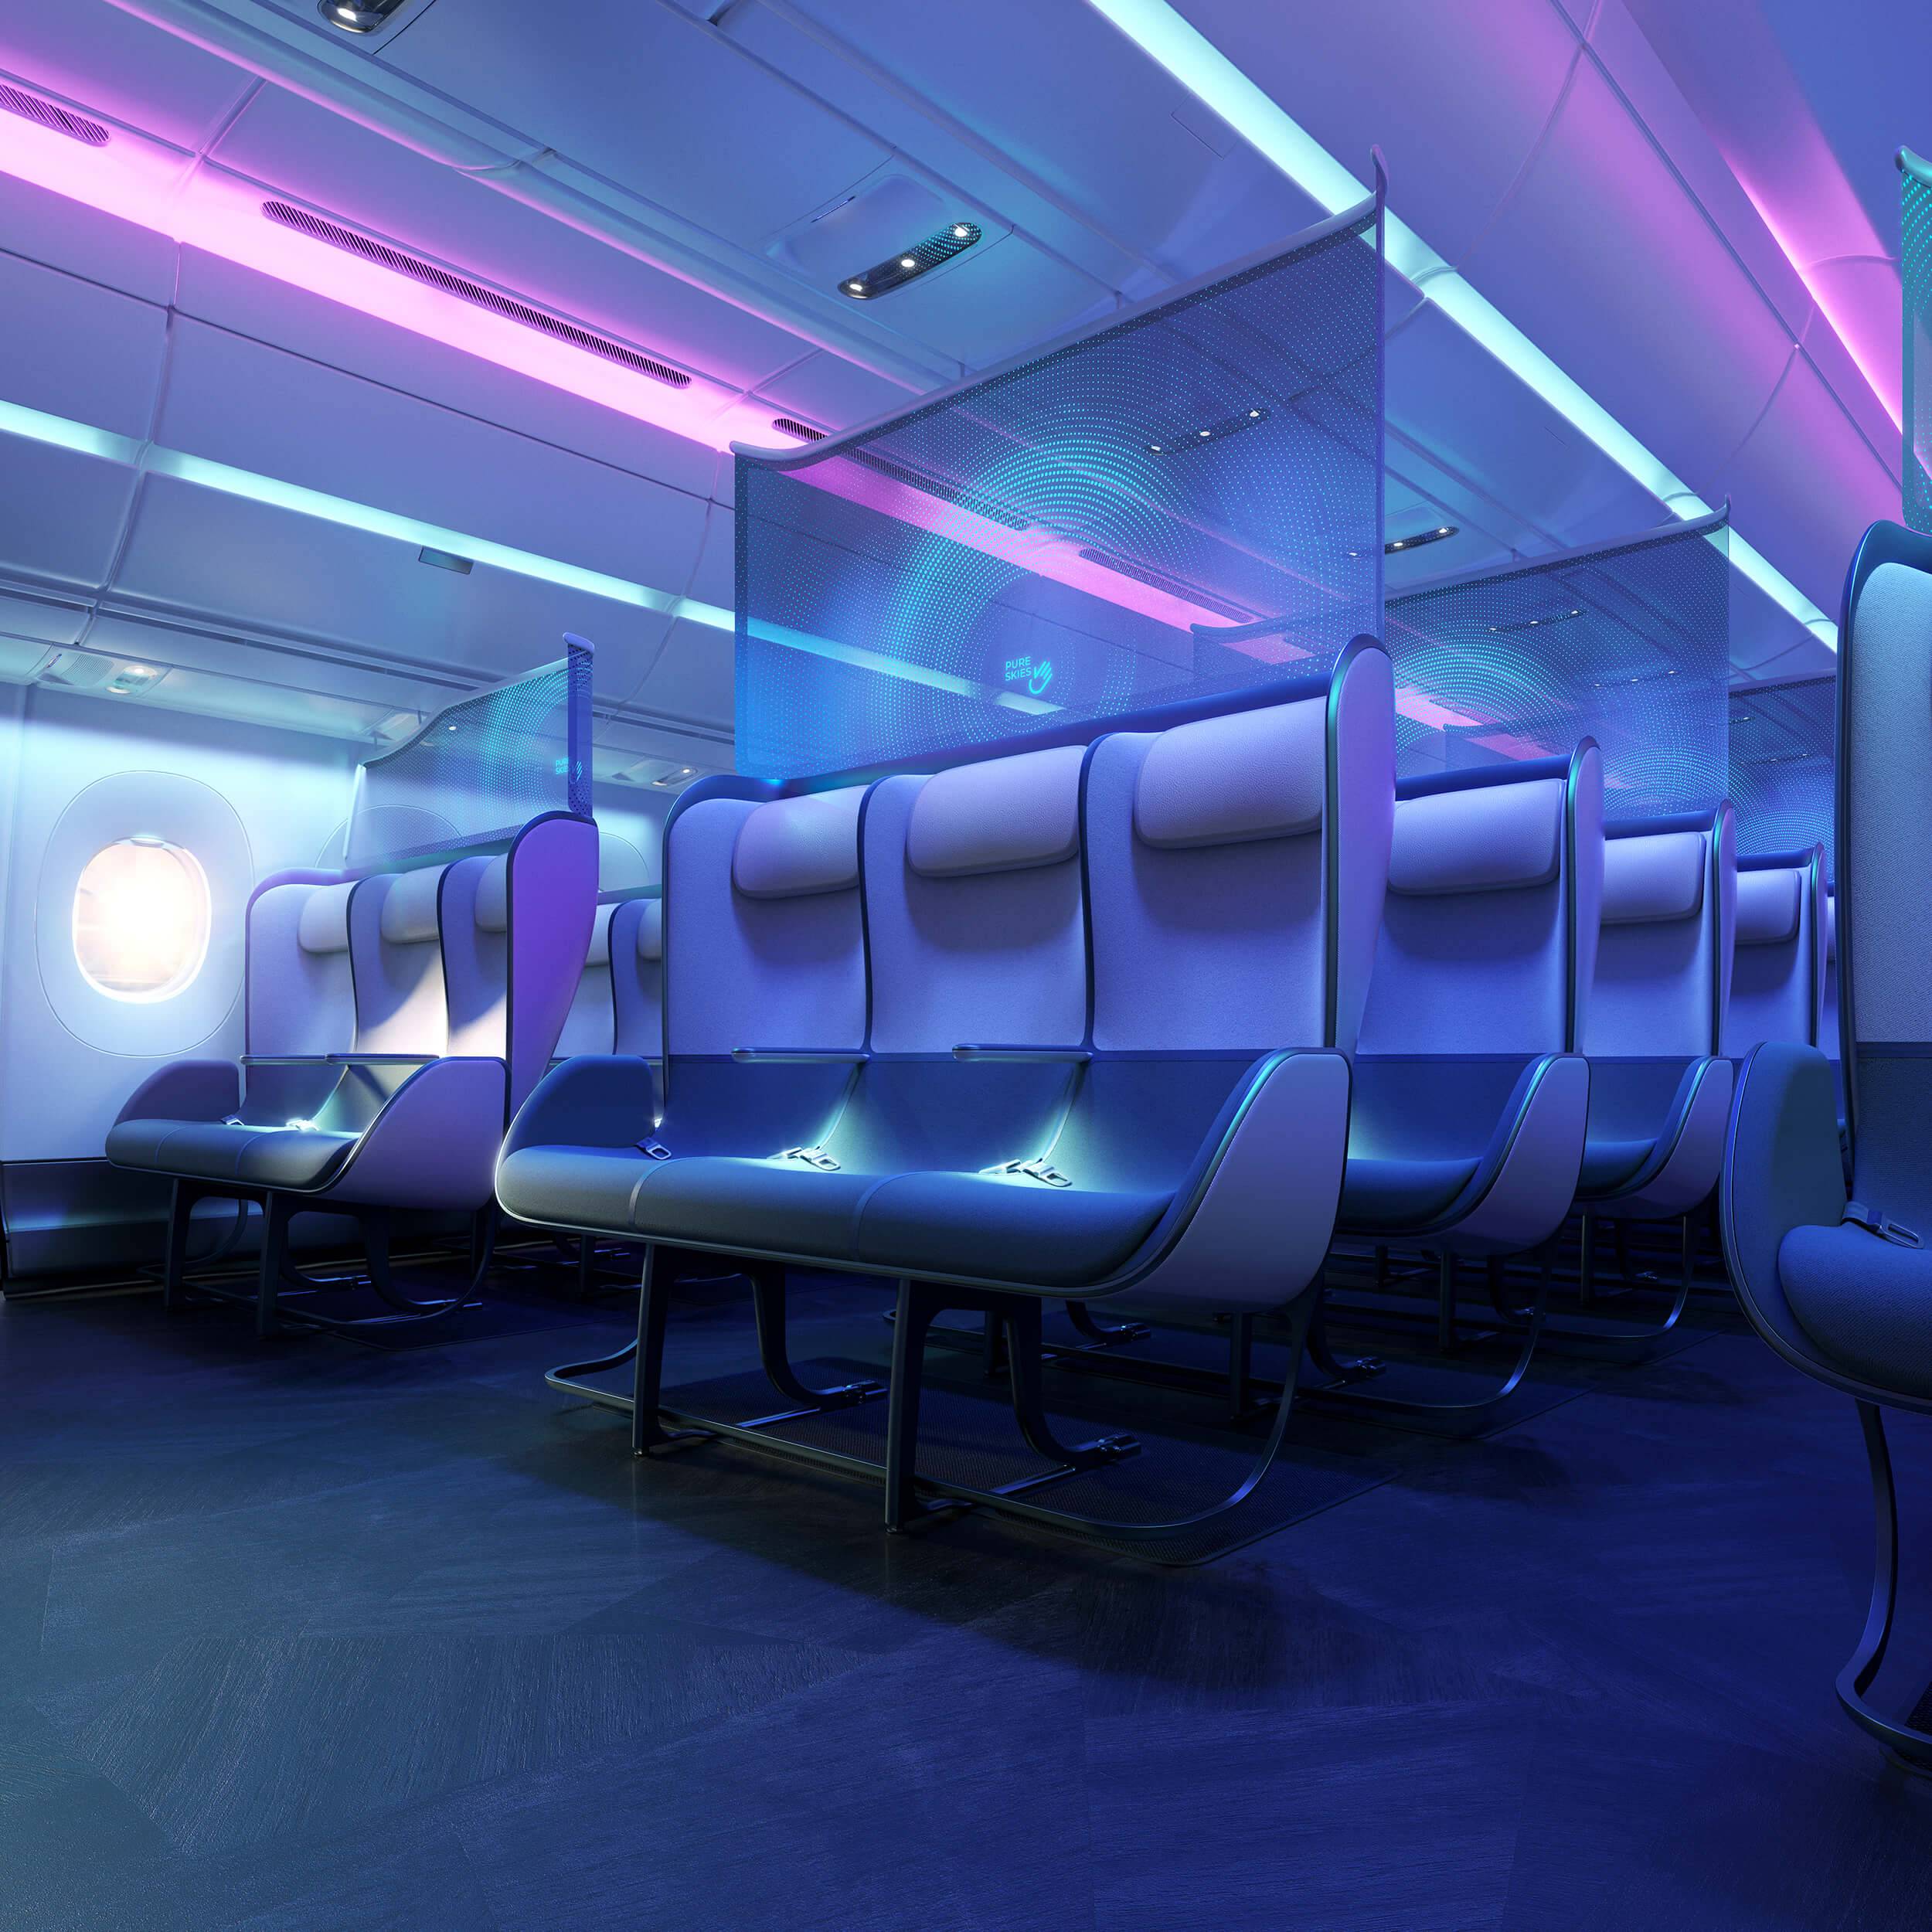 Economy class cabin shown in a blueish purple light. Dividing screens above seats between every two rows display a message of reassurance that the cabin has just been cleaned